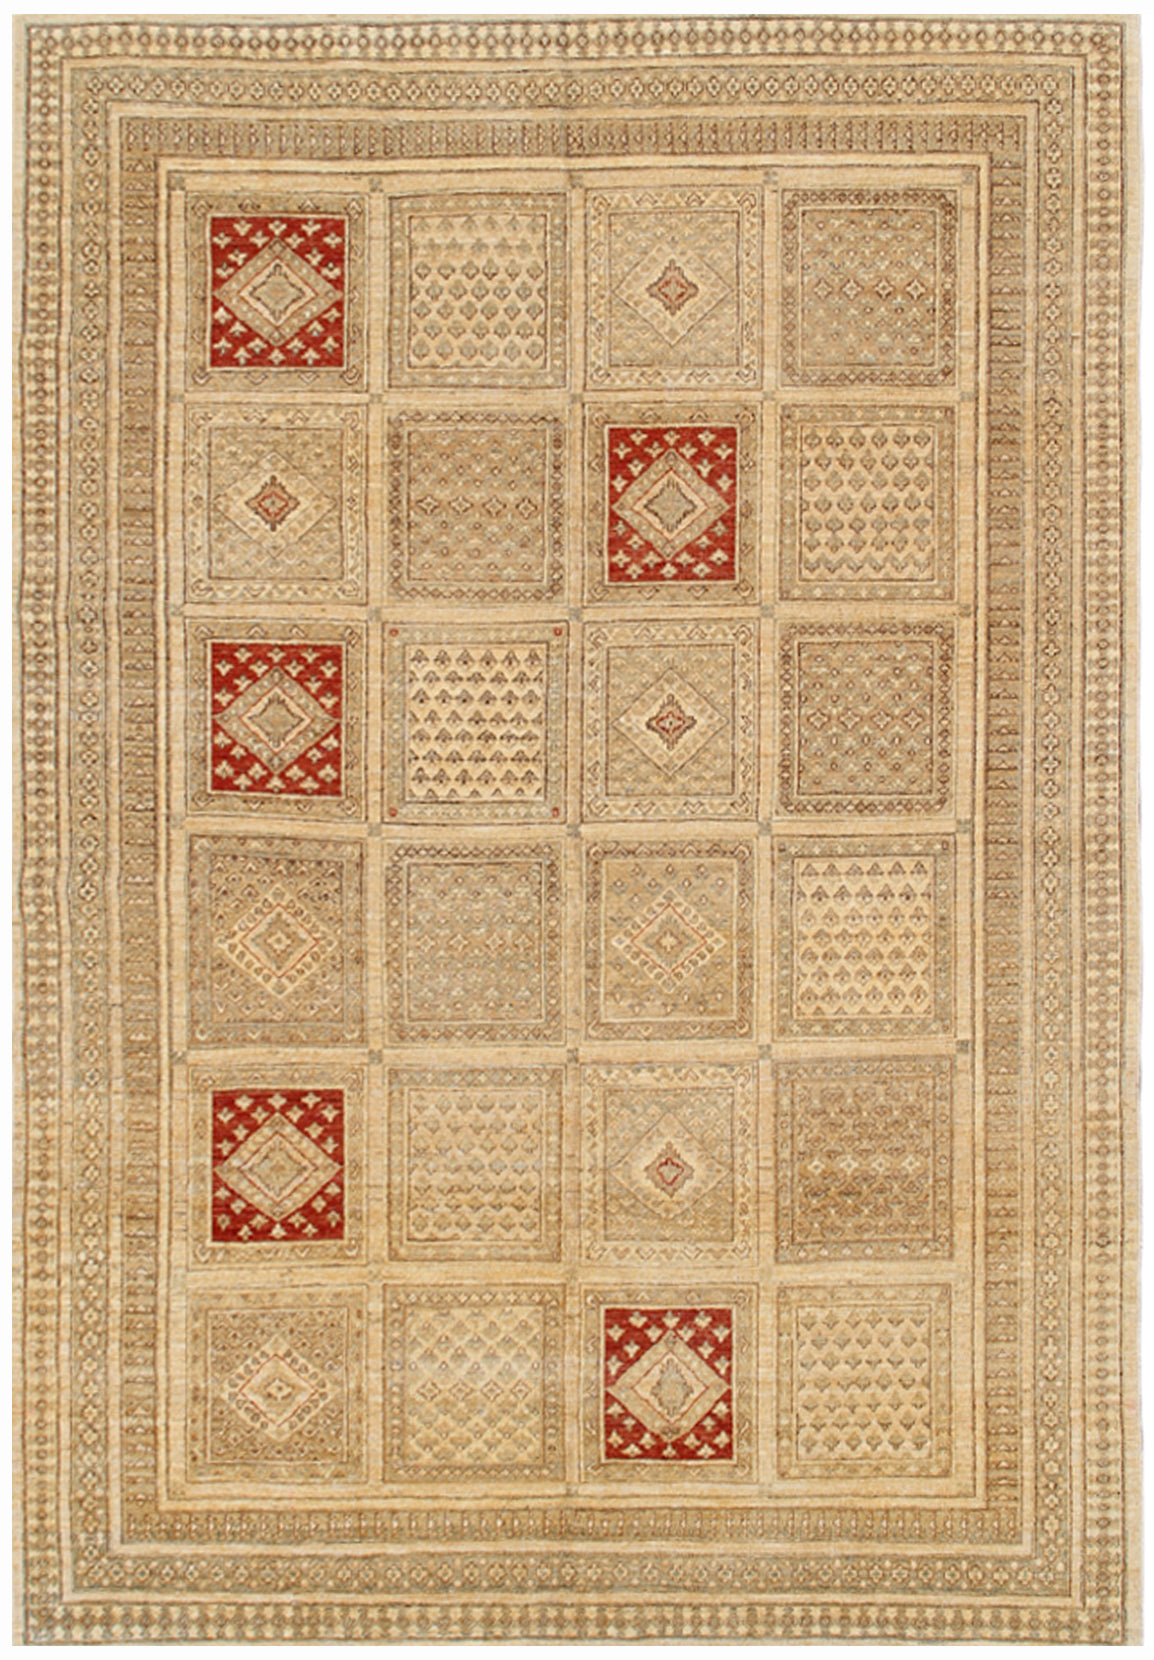 9.06 x  6.10 Earth Tone Touch Of Red Four Season Persian Design Ariana Traditional Area Rug